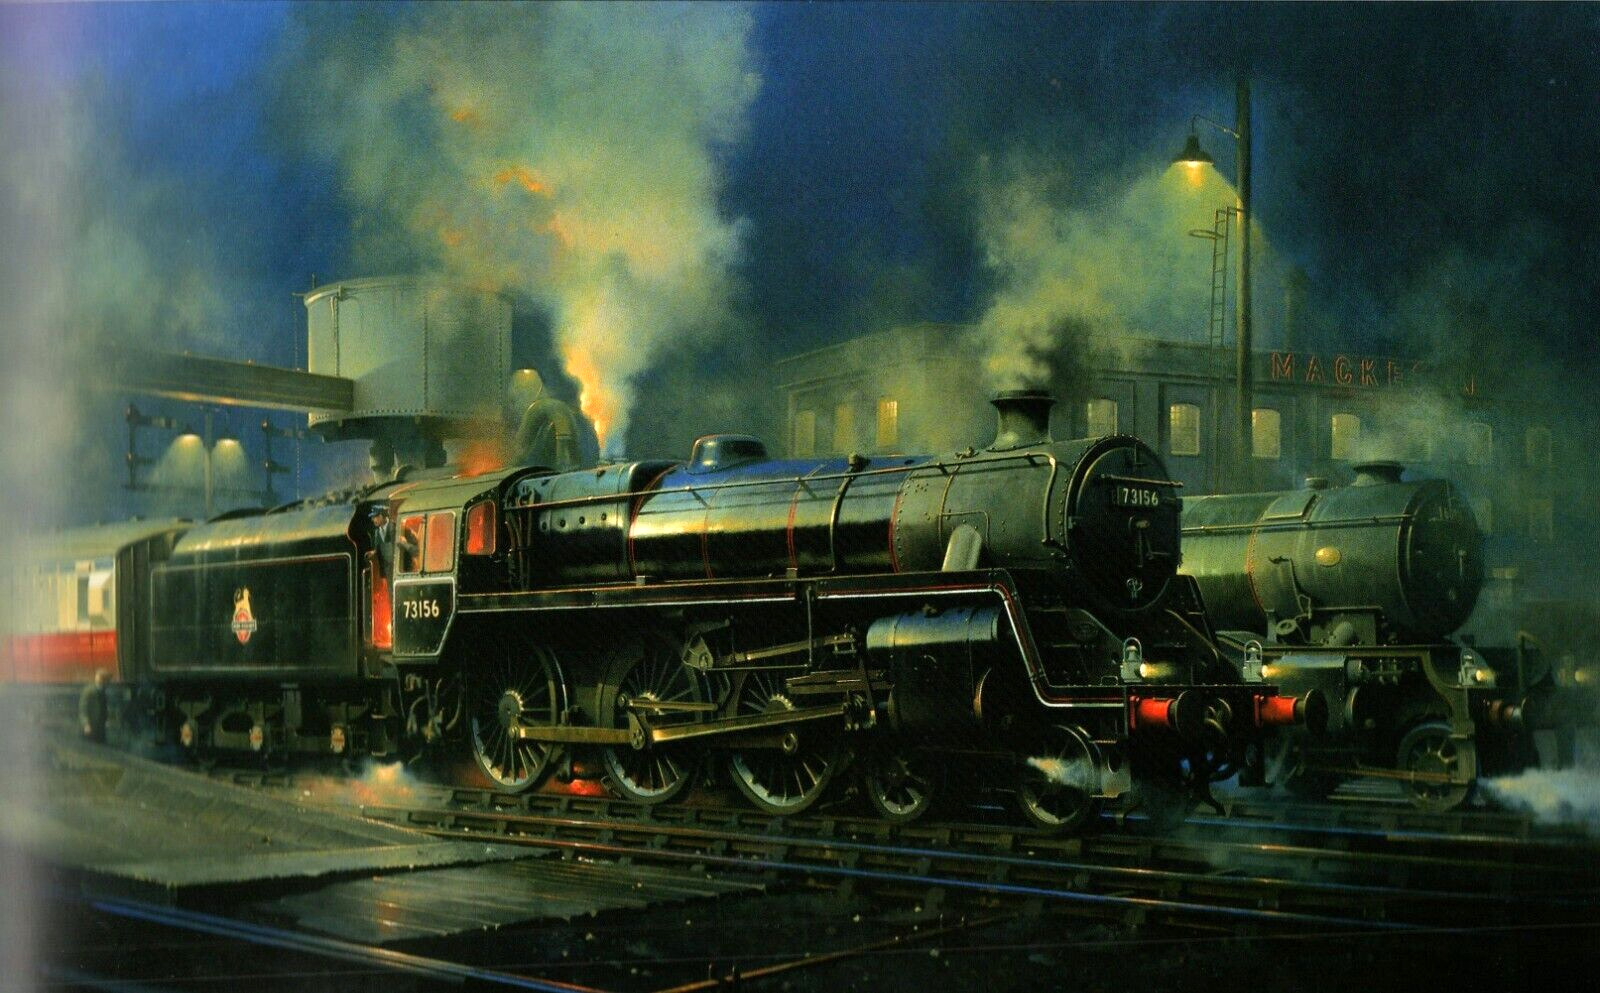 STEAM TRAINS & RAILWAYS LOCOMOTIVE 73156 AT LEICESTER CENTRAL FINE MOUNTED PRINT